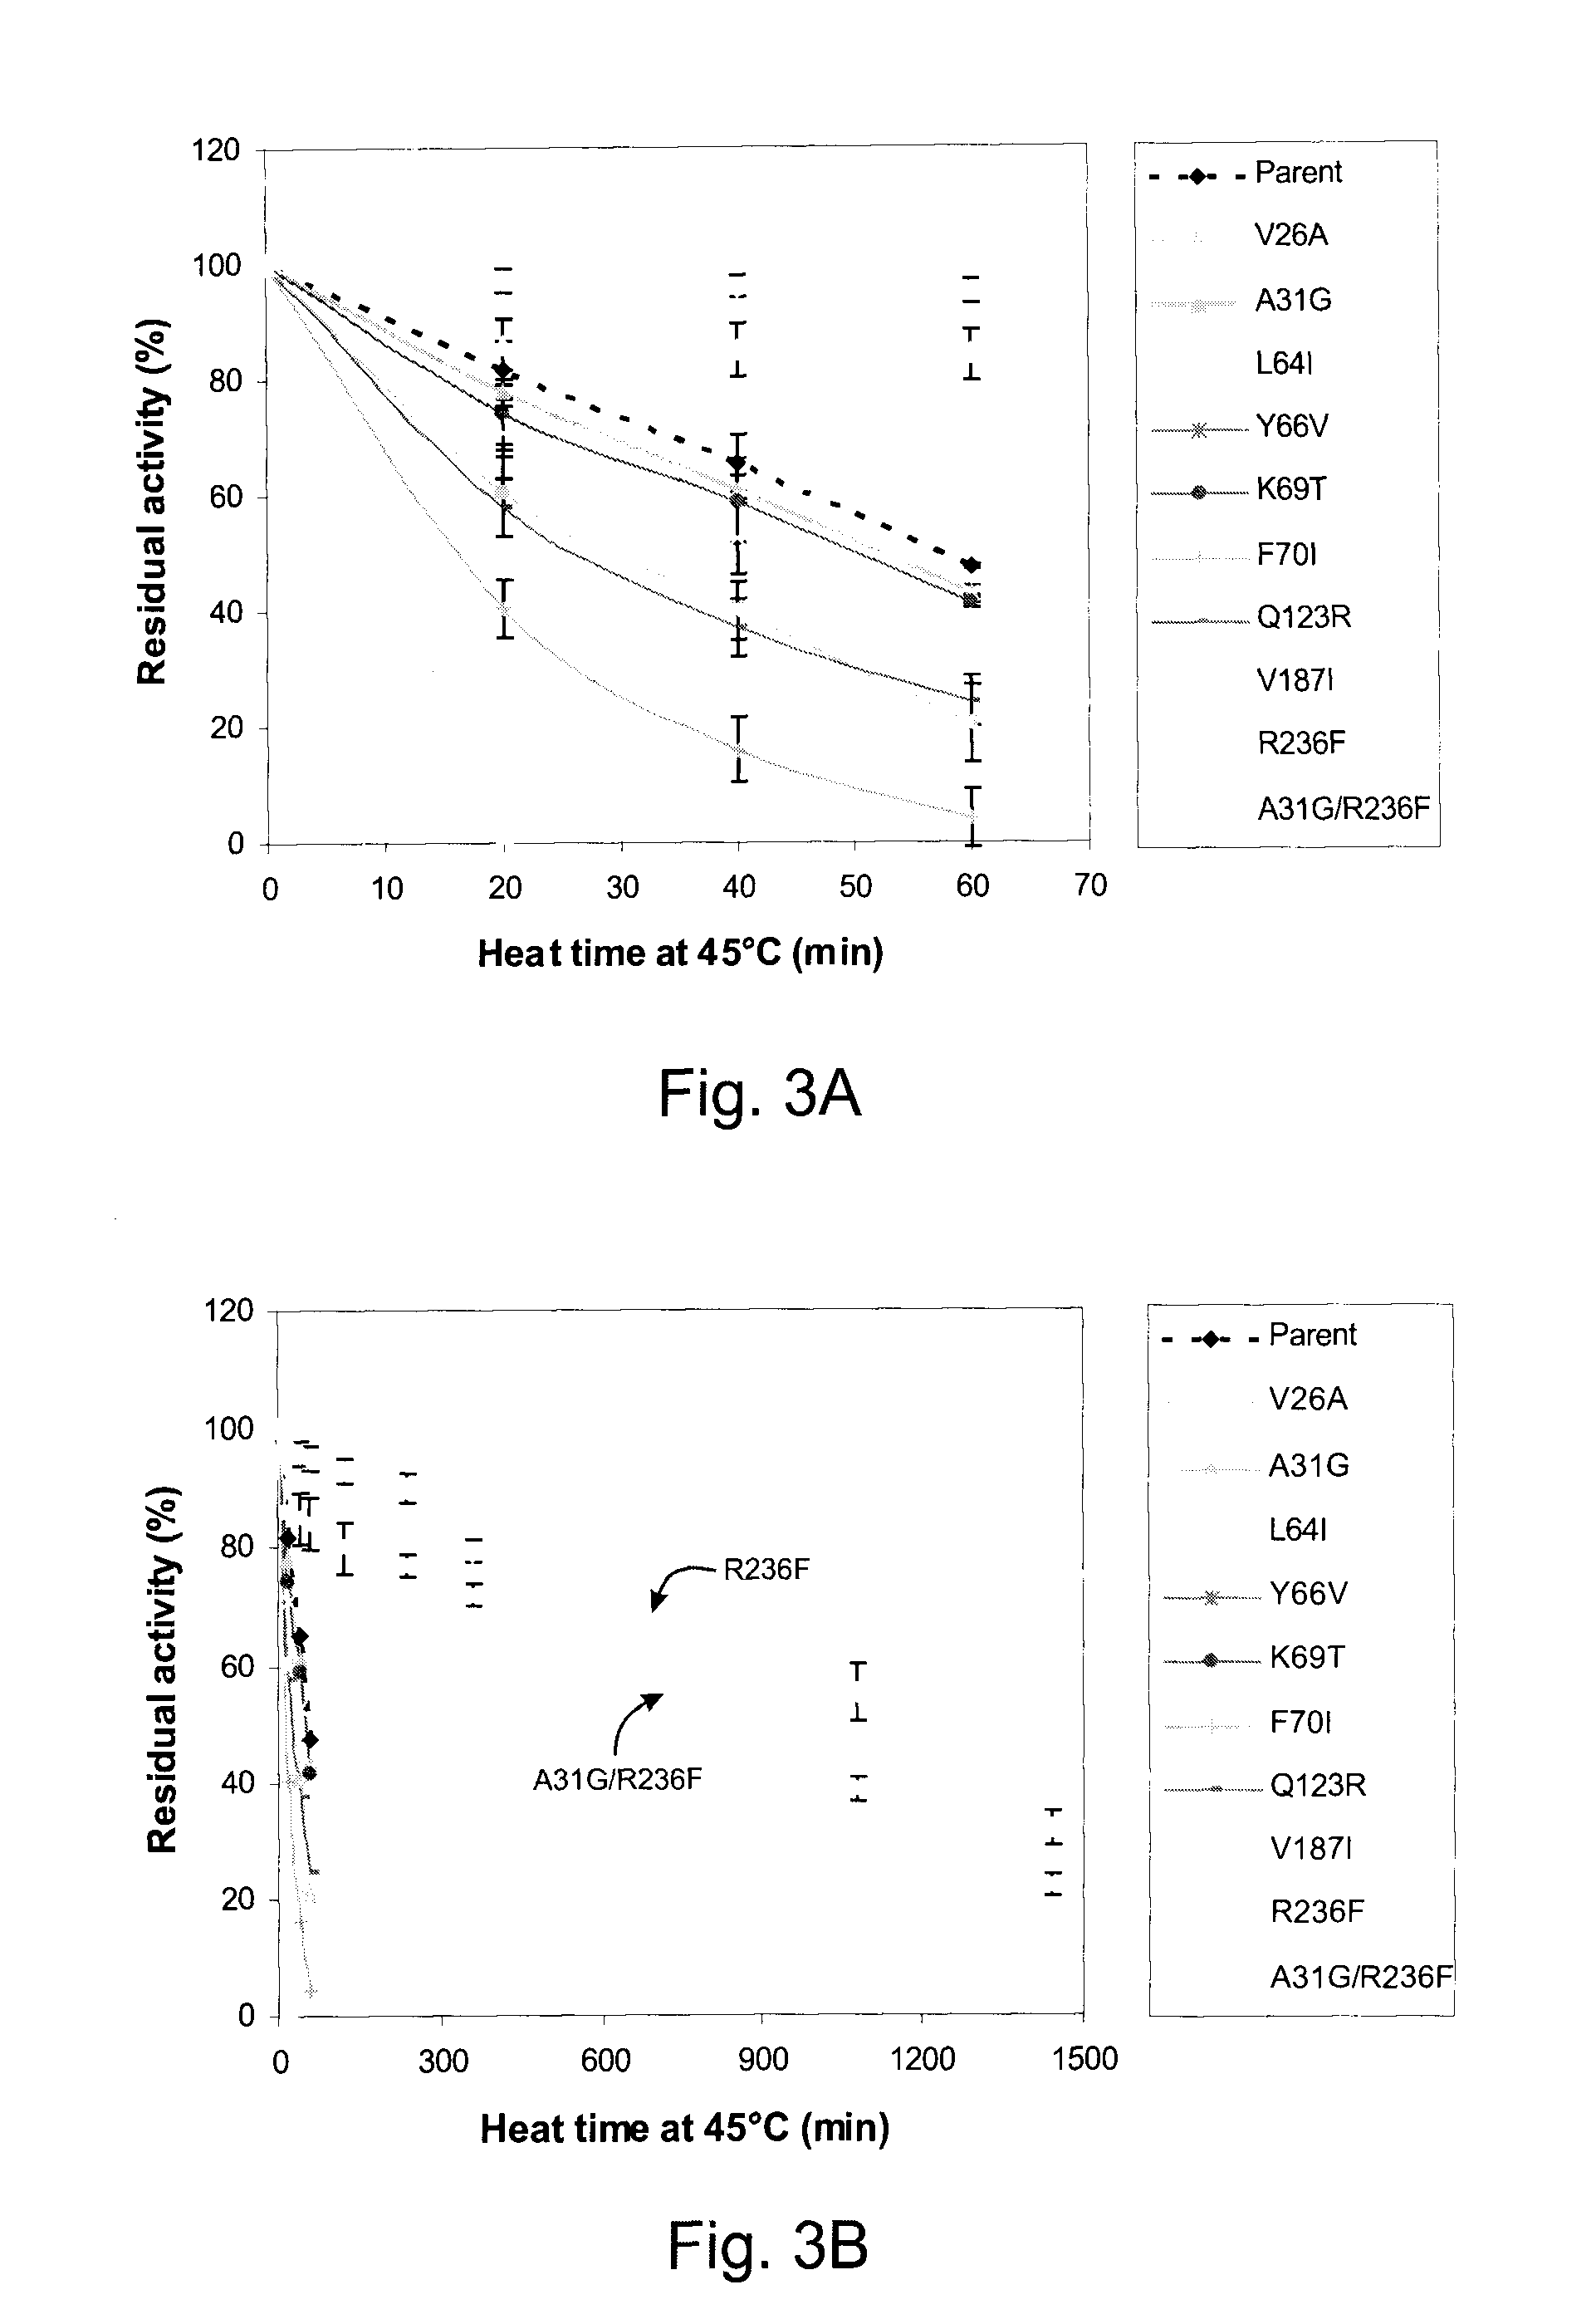 Pectate lyases with increased thermostability and/or enzymatic activity